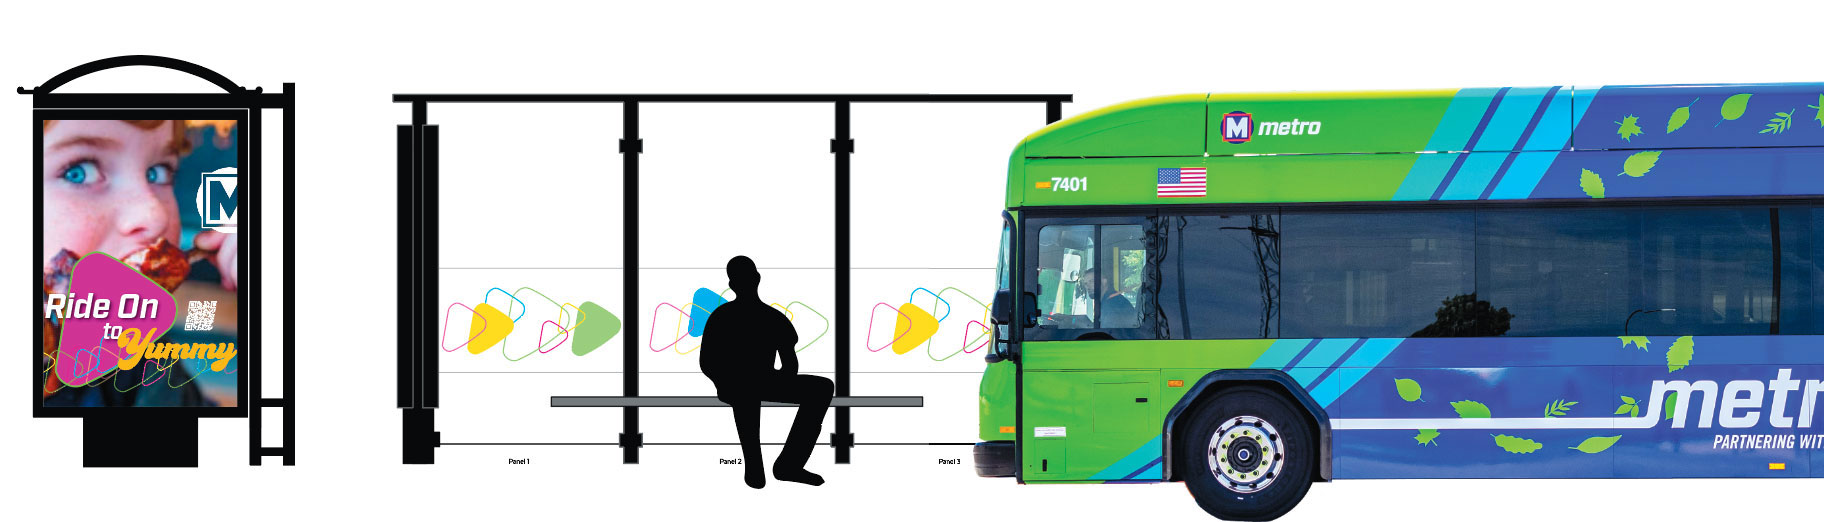 A rendering of a Metro advertisement on the side of a bus stop. A silhouette of a rider sits on the bench with a Metro bus to the side.